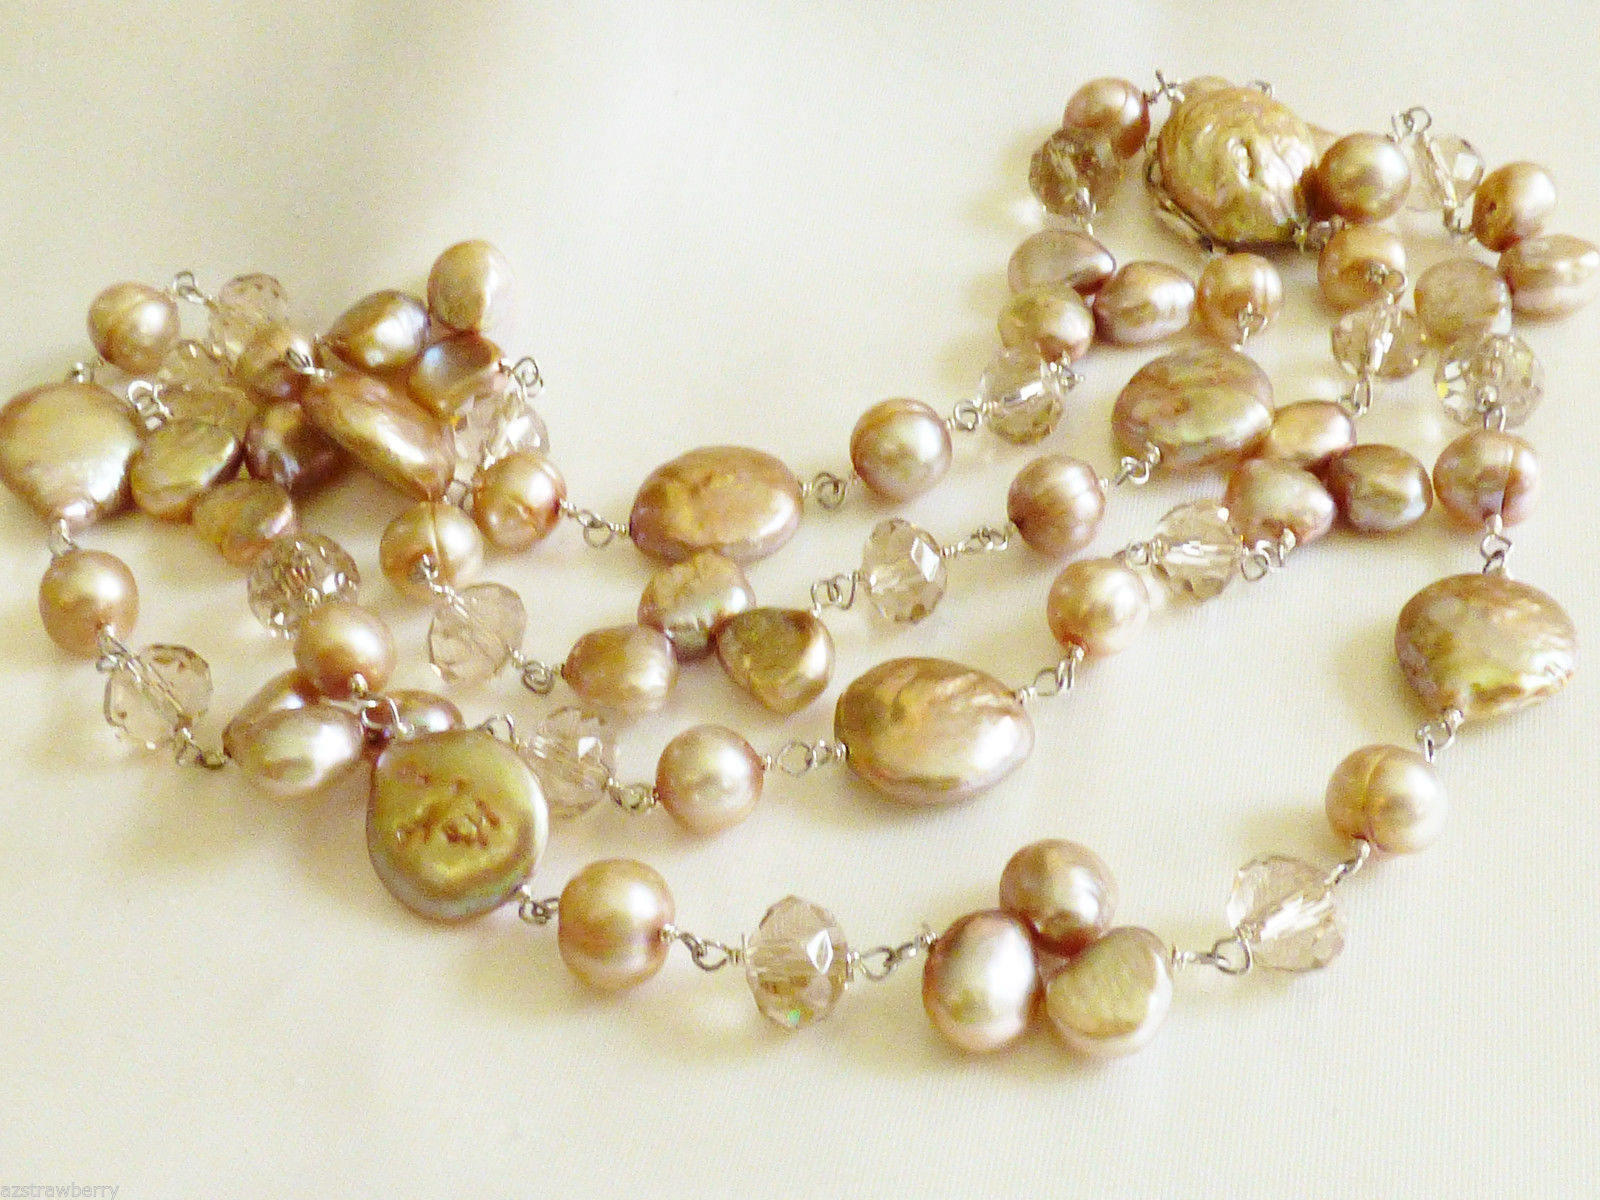 Cream color Keishi Pearl & Crystal beads Sterling Silver 925 link necklace 30"L - $123.75